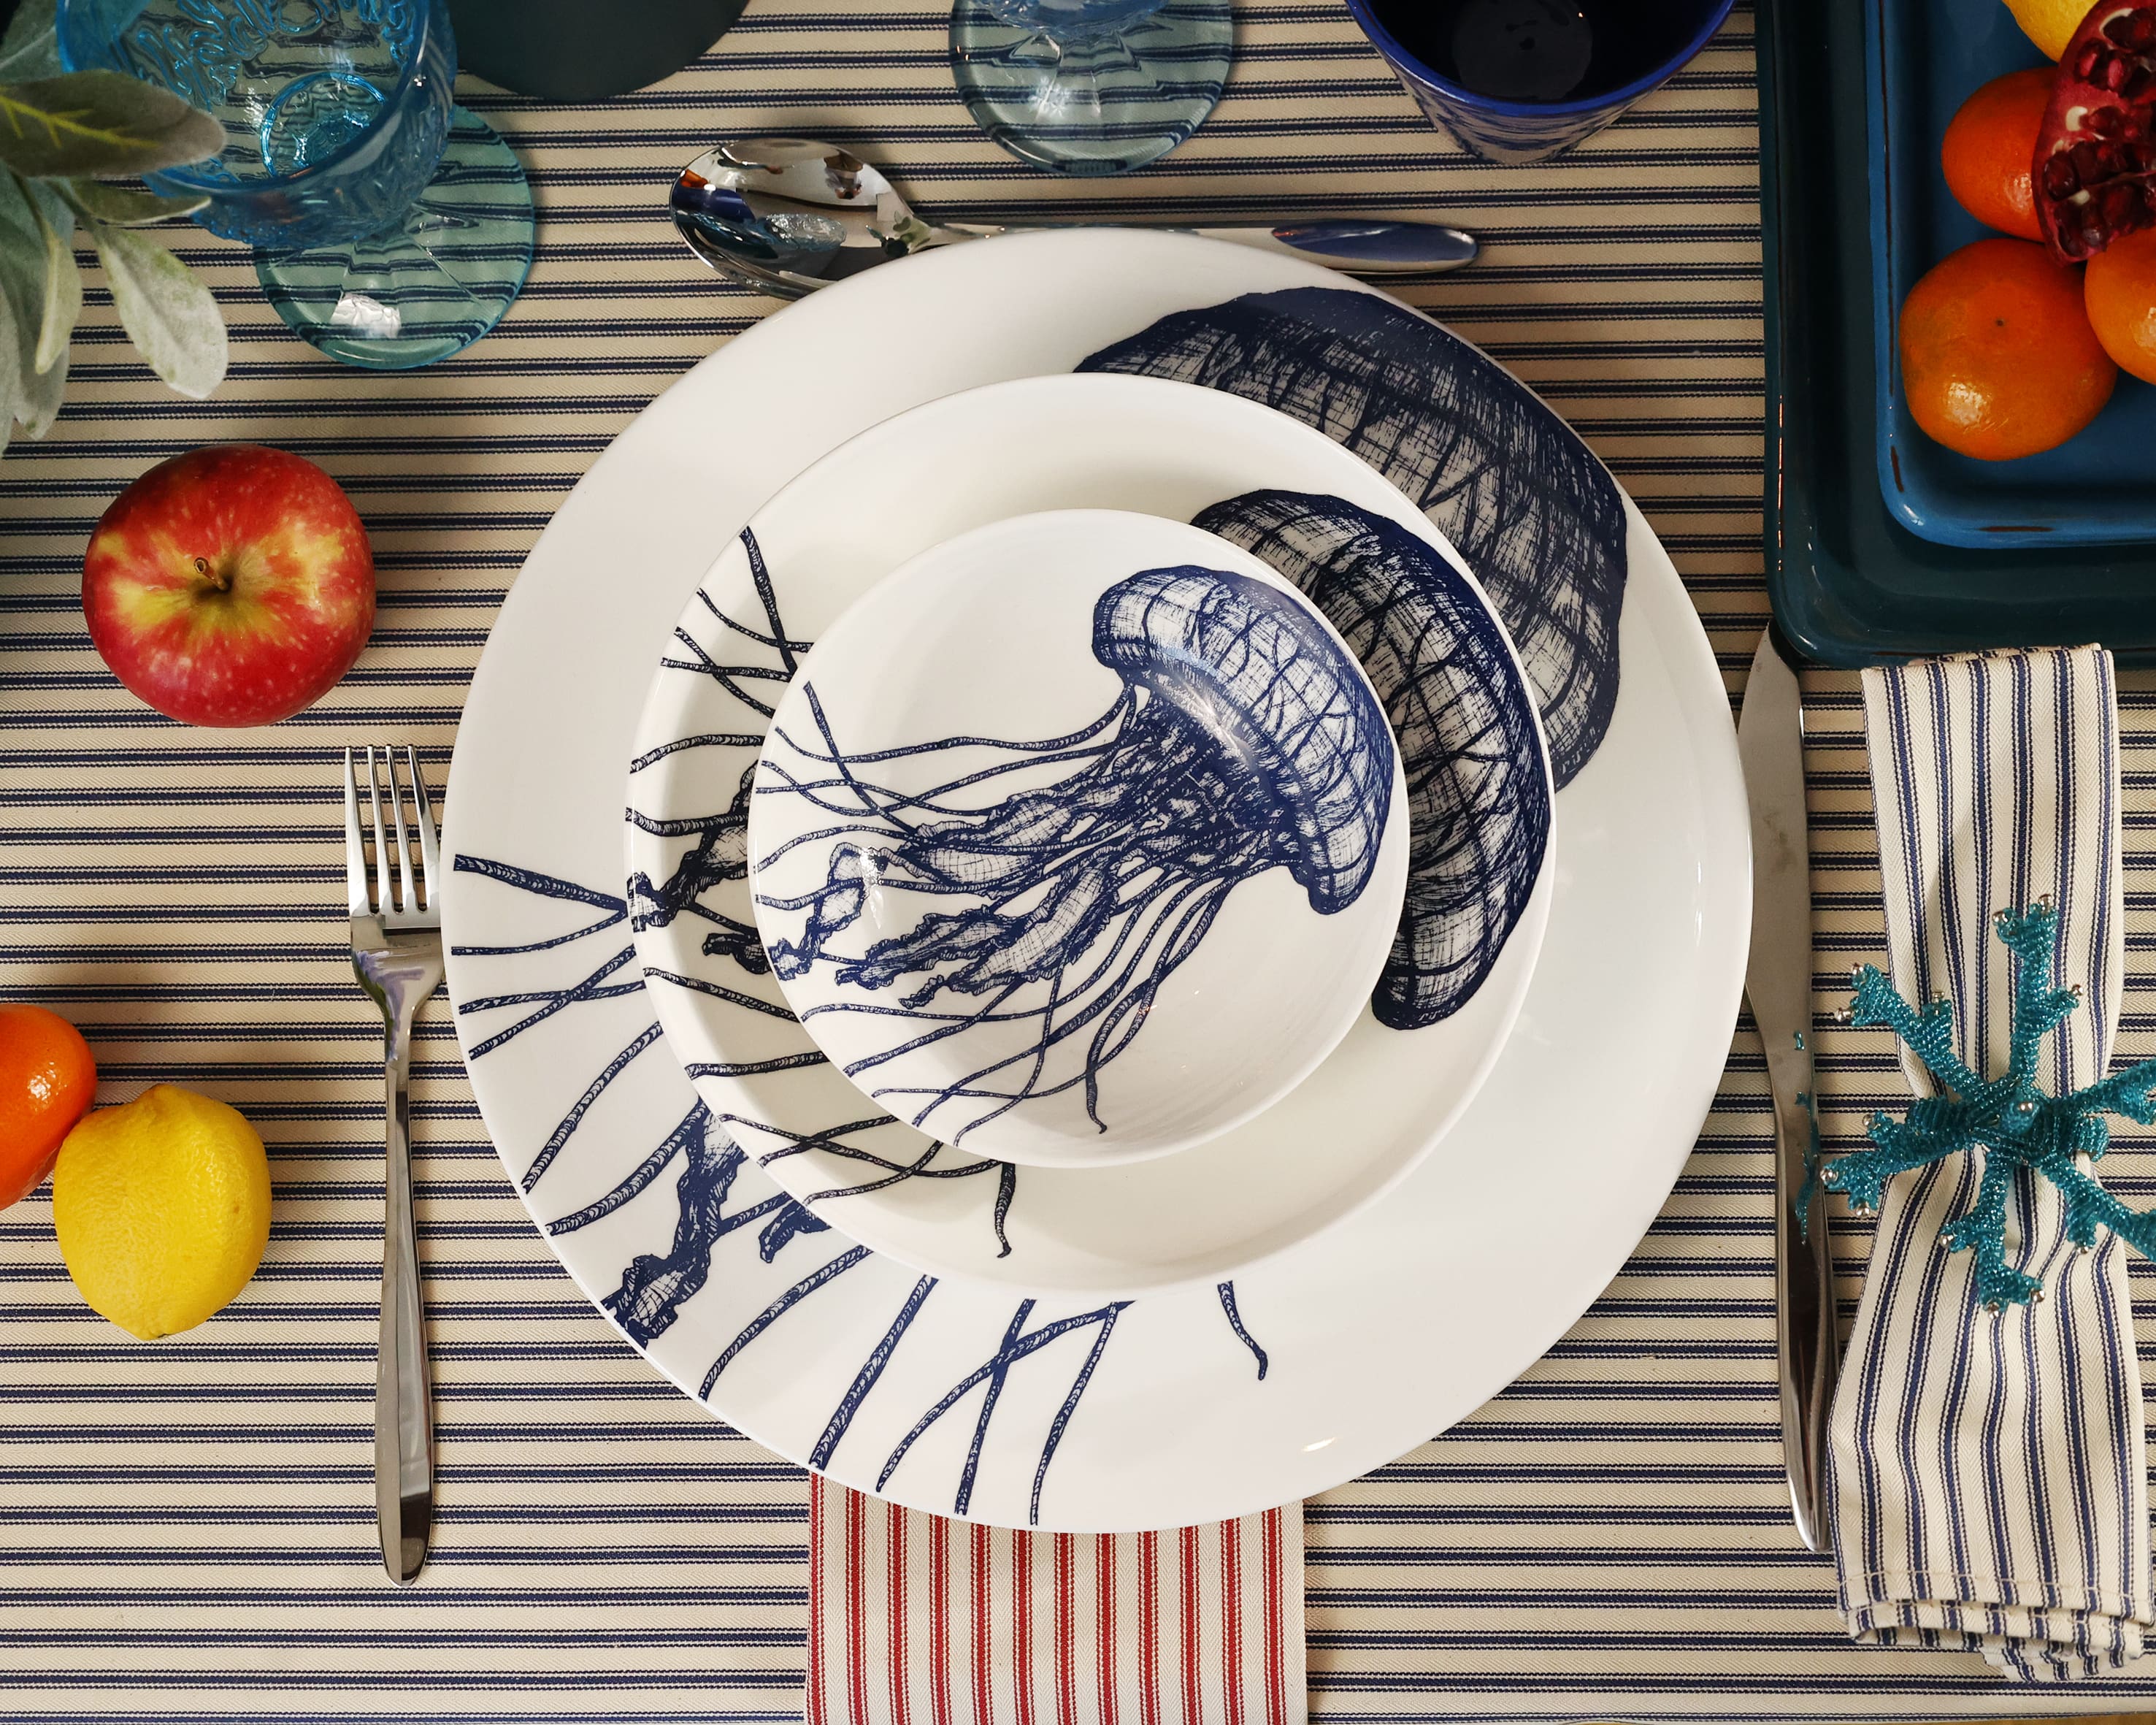 Aerial view of pasta bowl in Bone China in our Classic range in Navy and white in the Jellyfish design,placed on a matching dinner plate and has a smaller bowl placed inside.This is placed on a stripe tablecloth with various other tableware around the edge